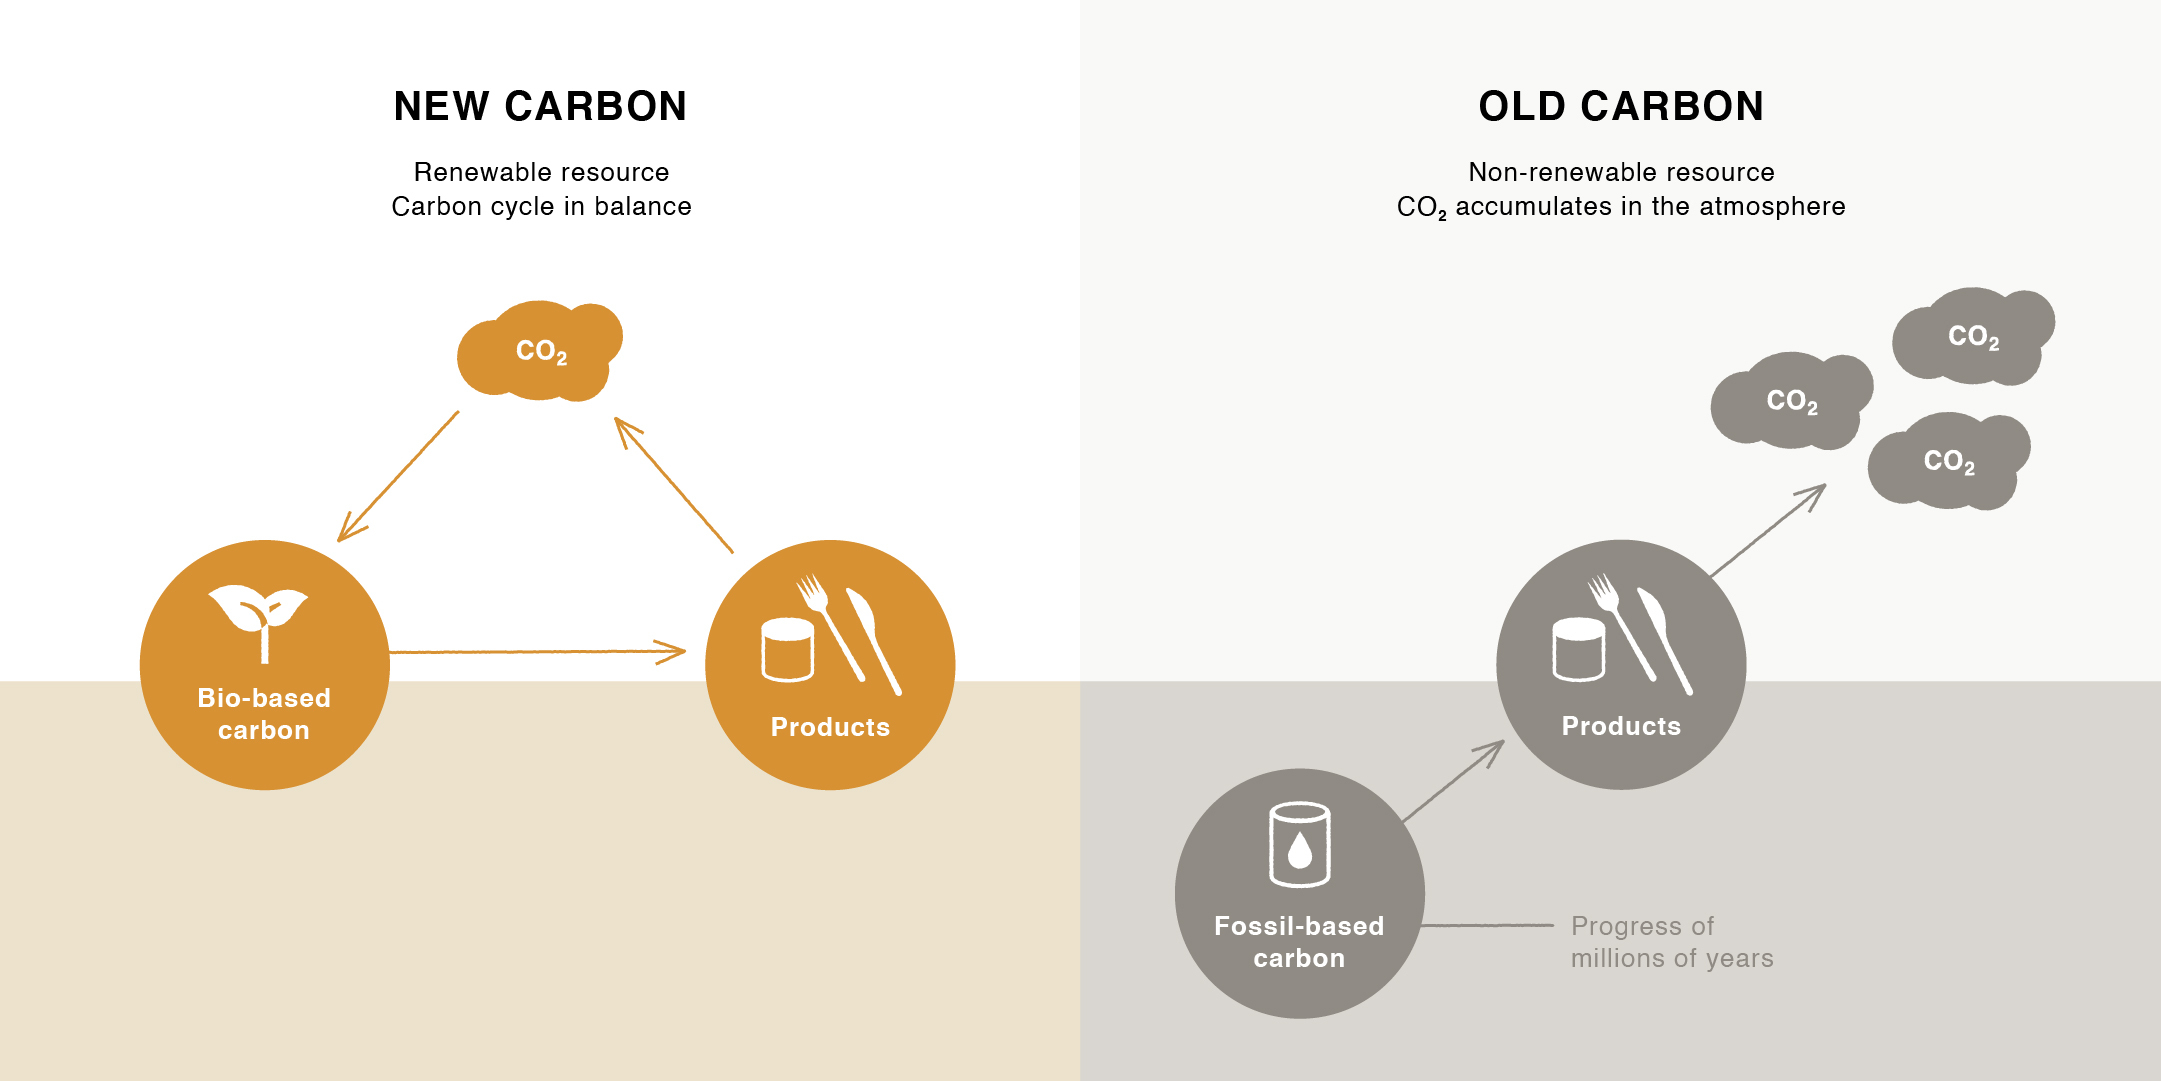 Utilizing fossil-based carbon increases the total quantity of CO2 in the atmosphere.